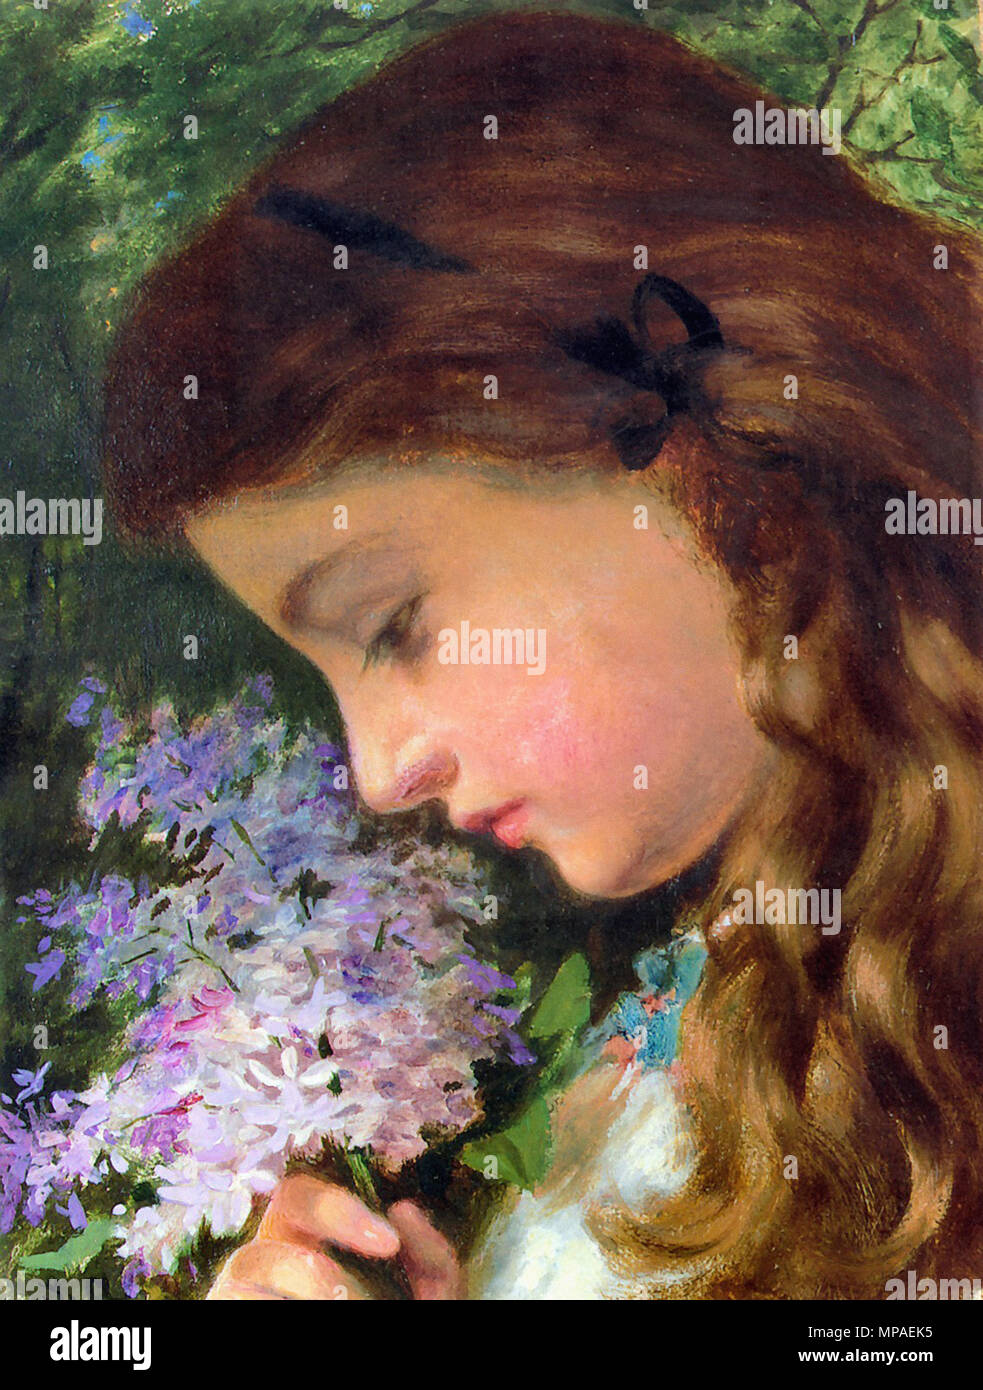 Anderson Sophie - Girl with Lilacs Stock Photo